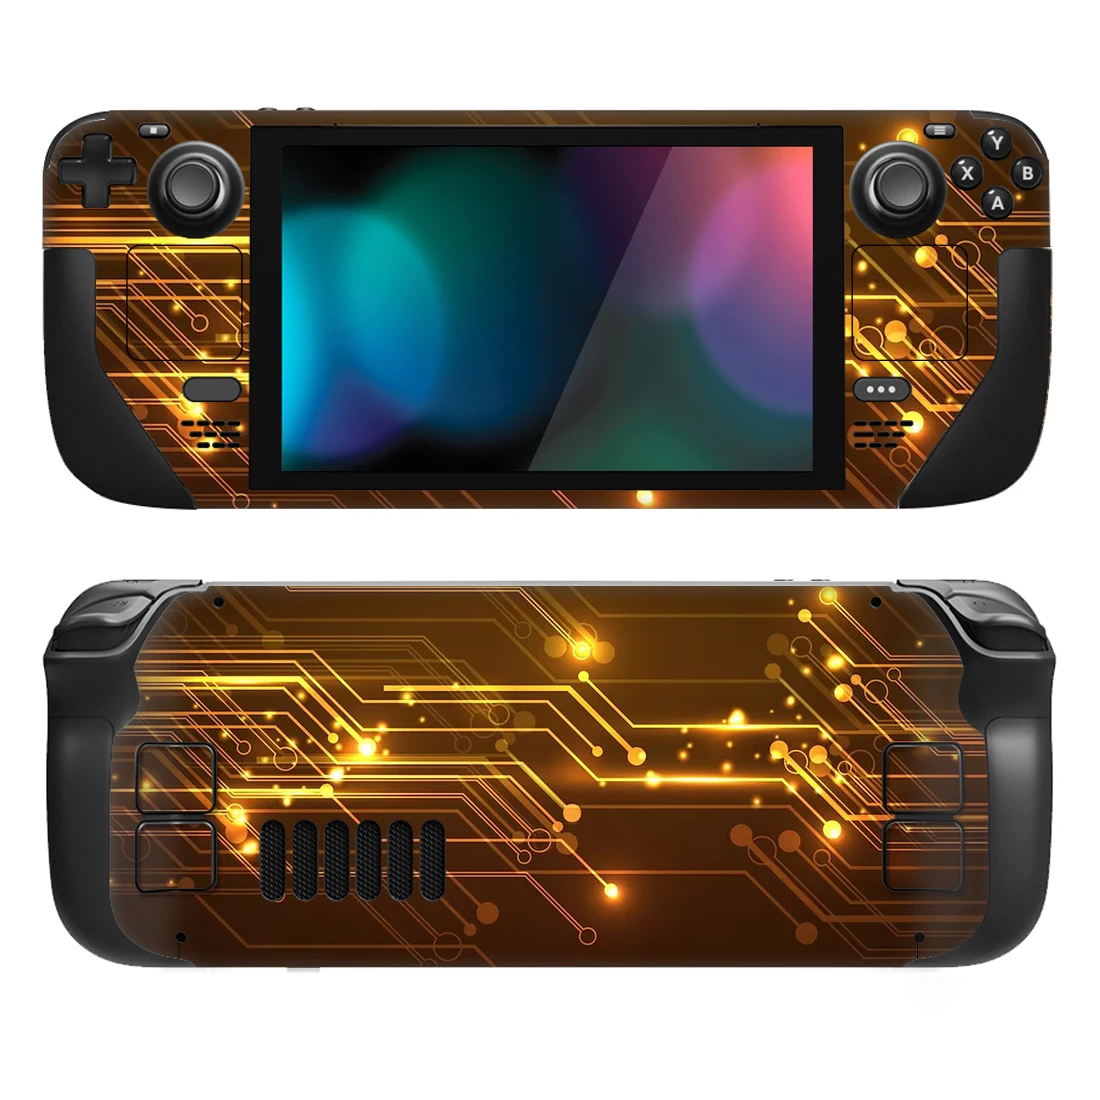 

Geometry Style Vinyl Sticker For Steam Deck Console Protector Game Accessories Skin Sticker